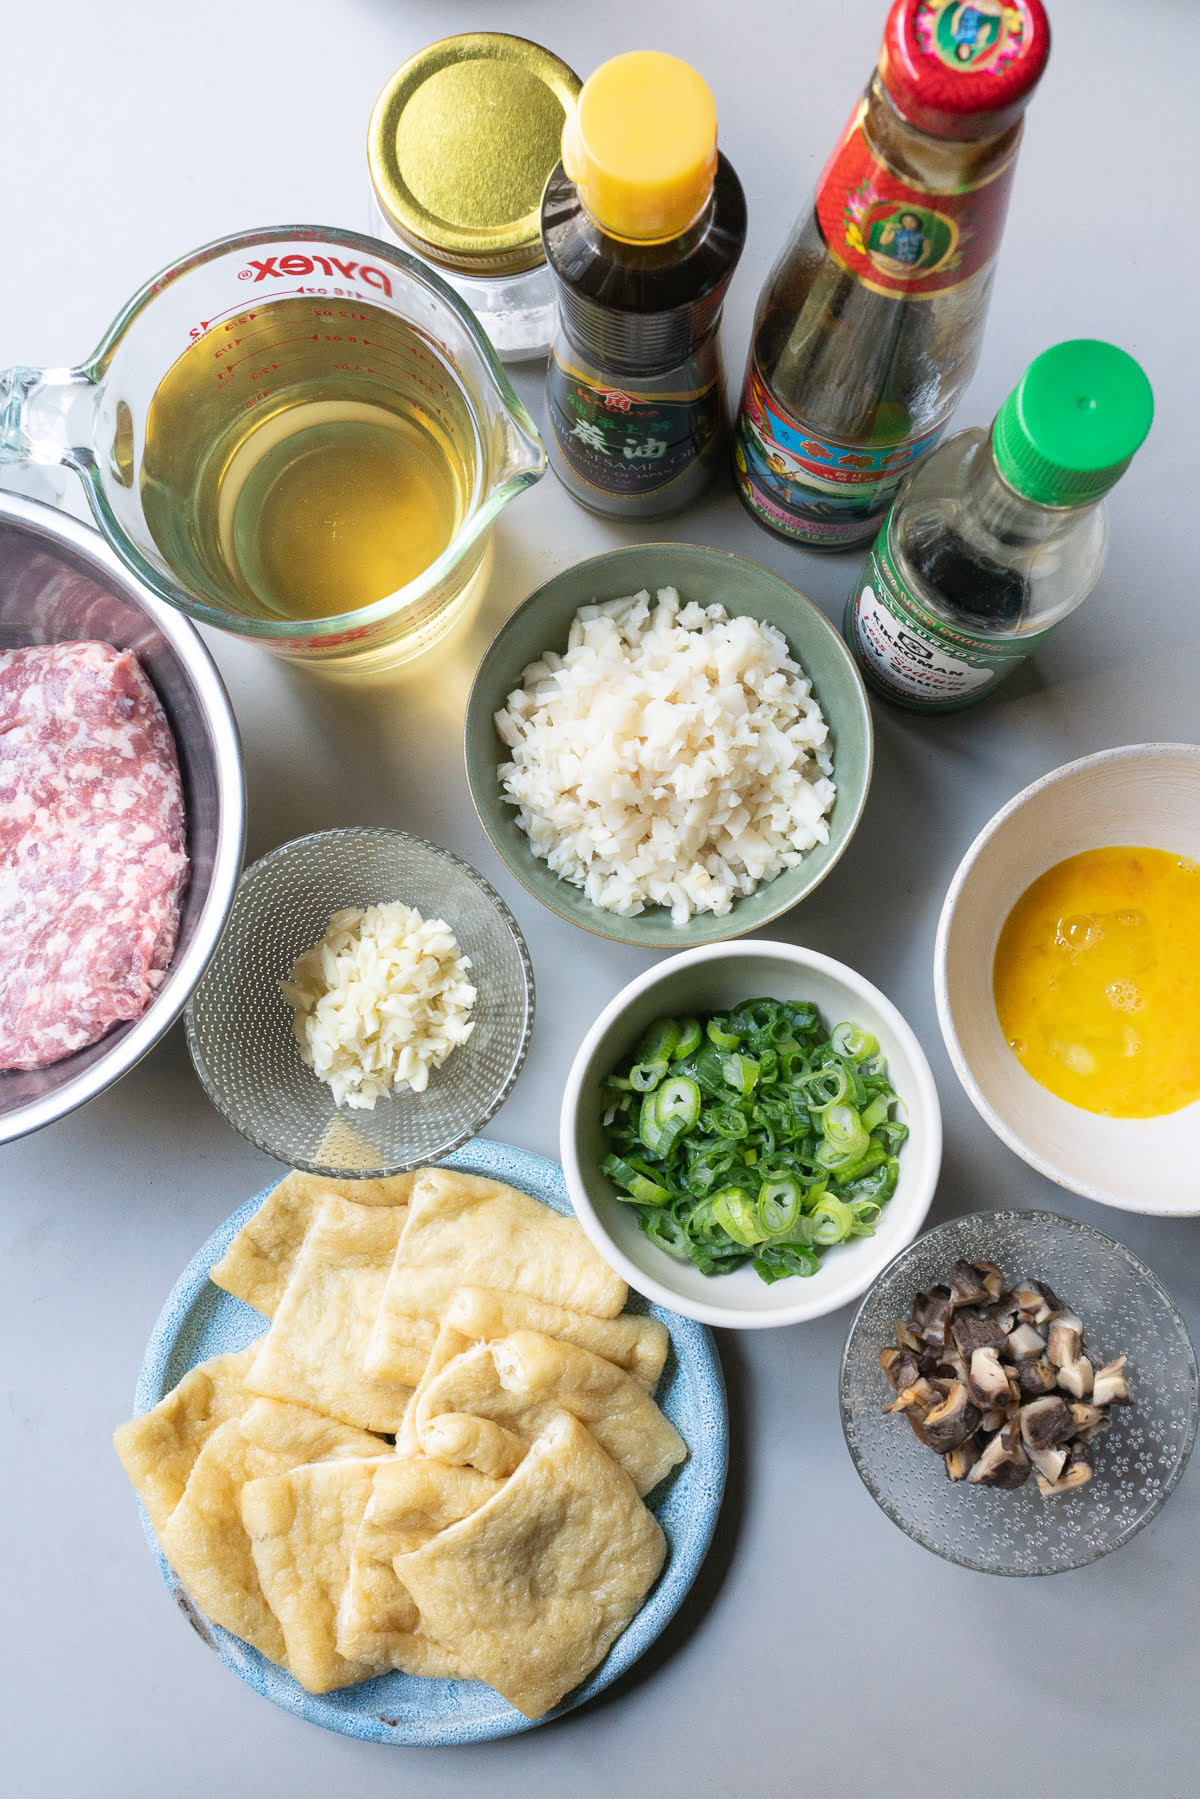 Ingredients for stuffed aburage (aburage, ground pork, garlic, water chestnuts, shiitake mushrooms, green onions, egg, soy sauce, oyster sauce, sesame oil, cornstarch, and broth), laid out on a table.